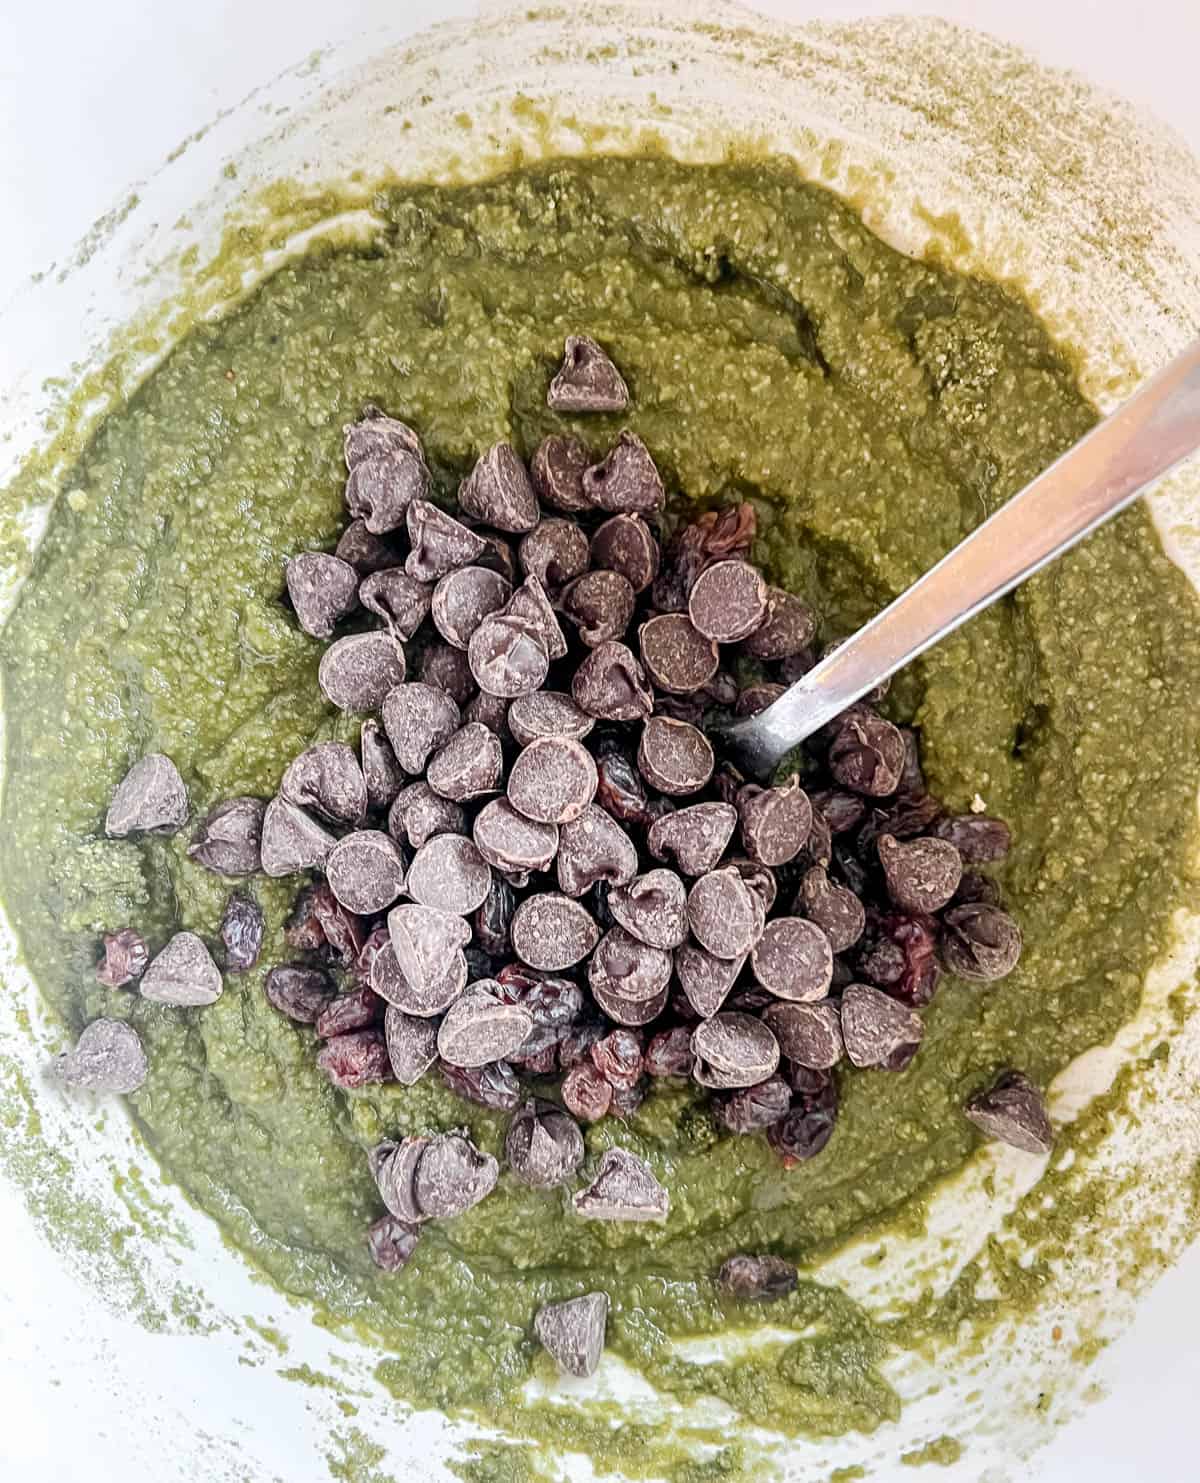 Chocolate chips and raisins added to the matcha brownie batter.